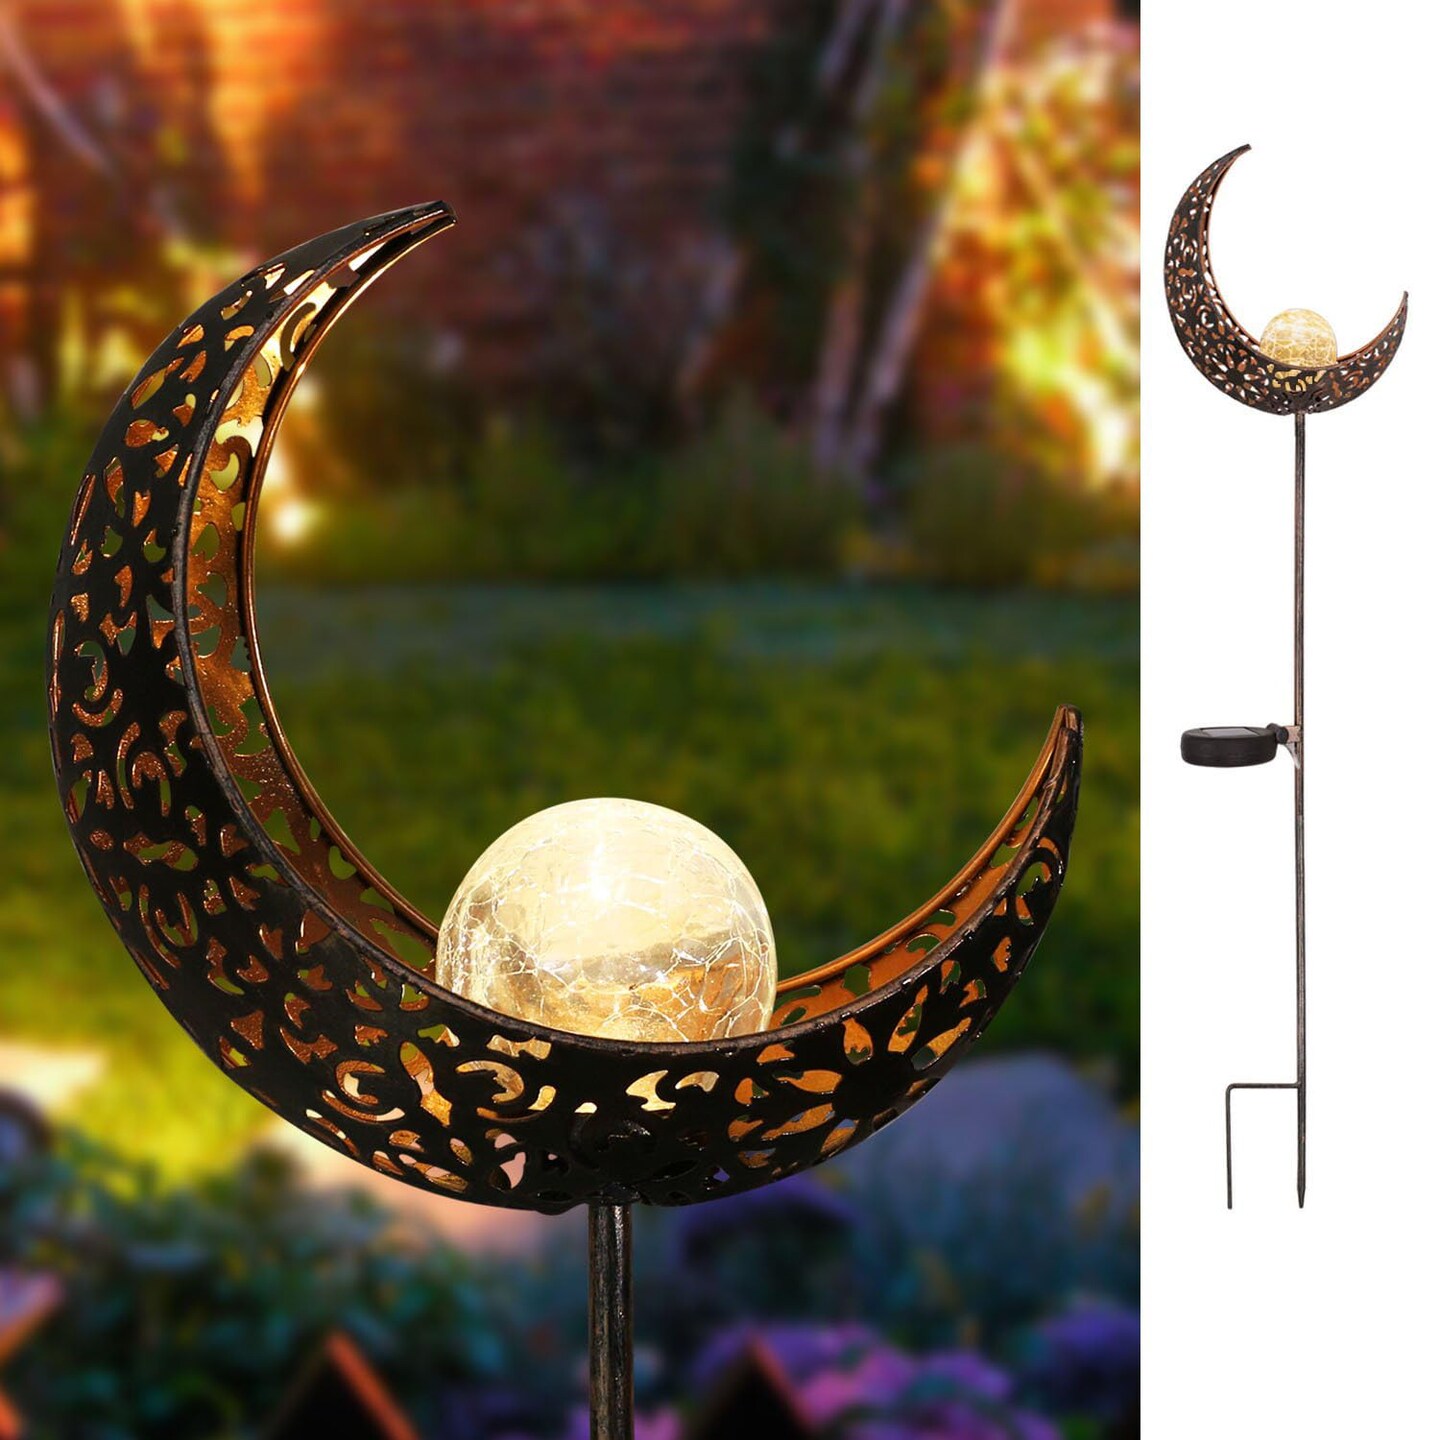 HOMEIMPRO Moon Solar Garden Lights Outdoor Stakes, Waterproof Crackle Glass Metal Decorative Lights for Lawn, Patio Accessories, Yard Decor, Christmas Gift (Bronze)